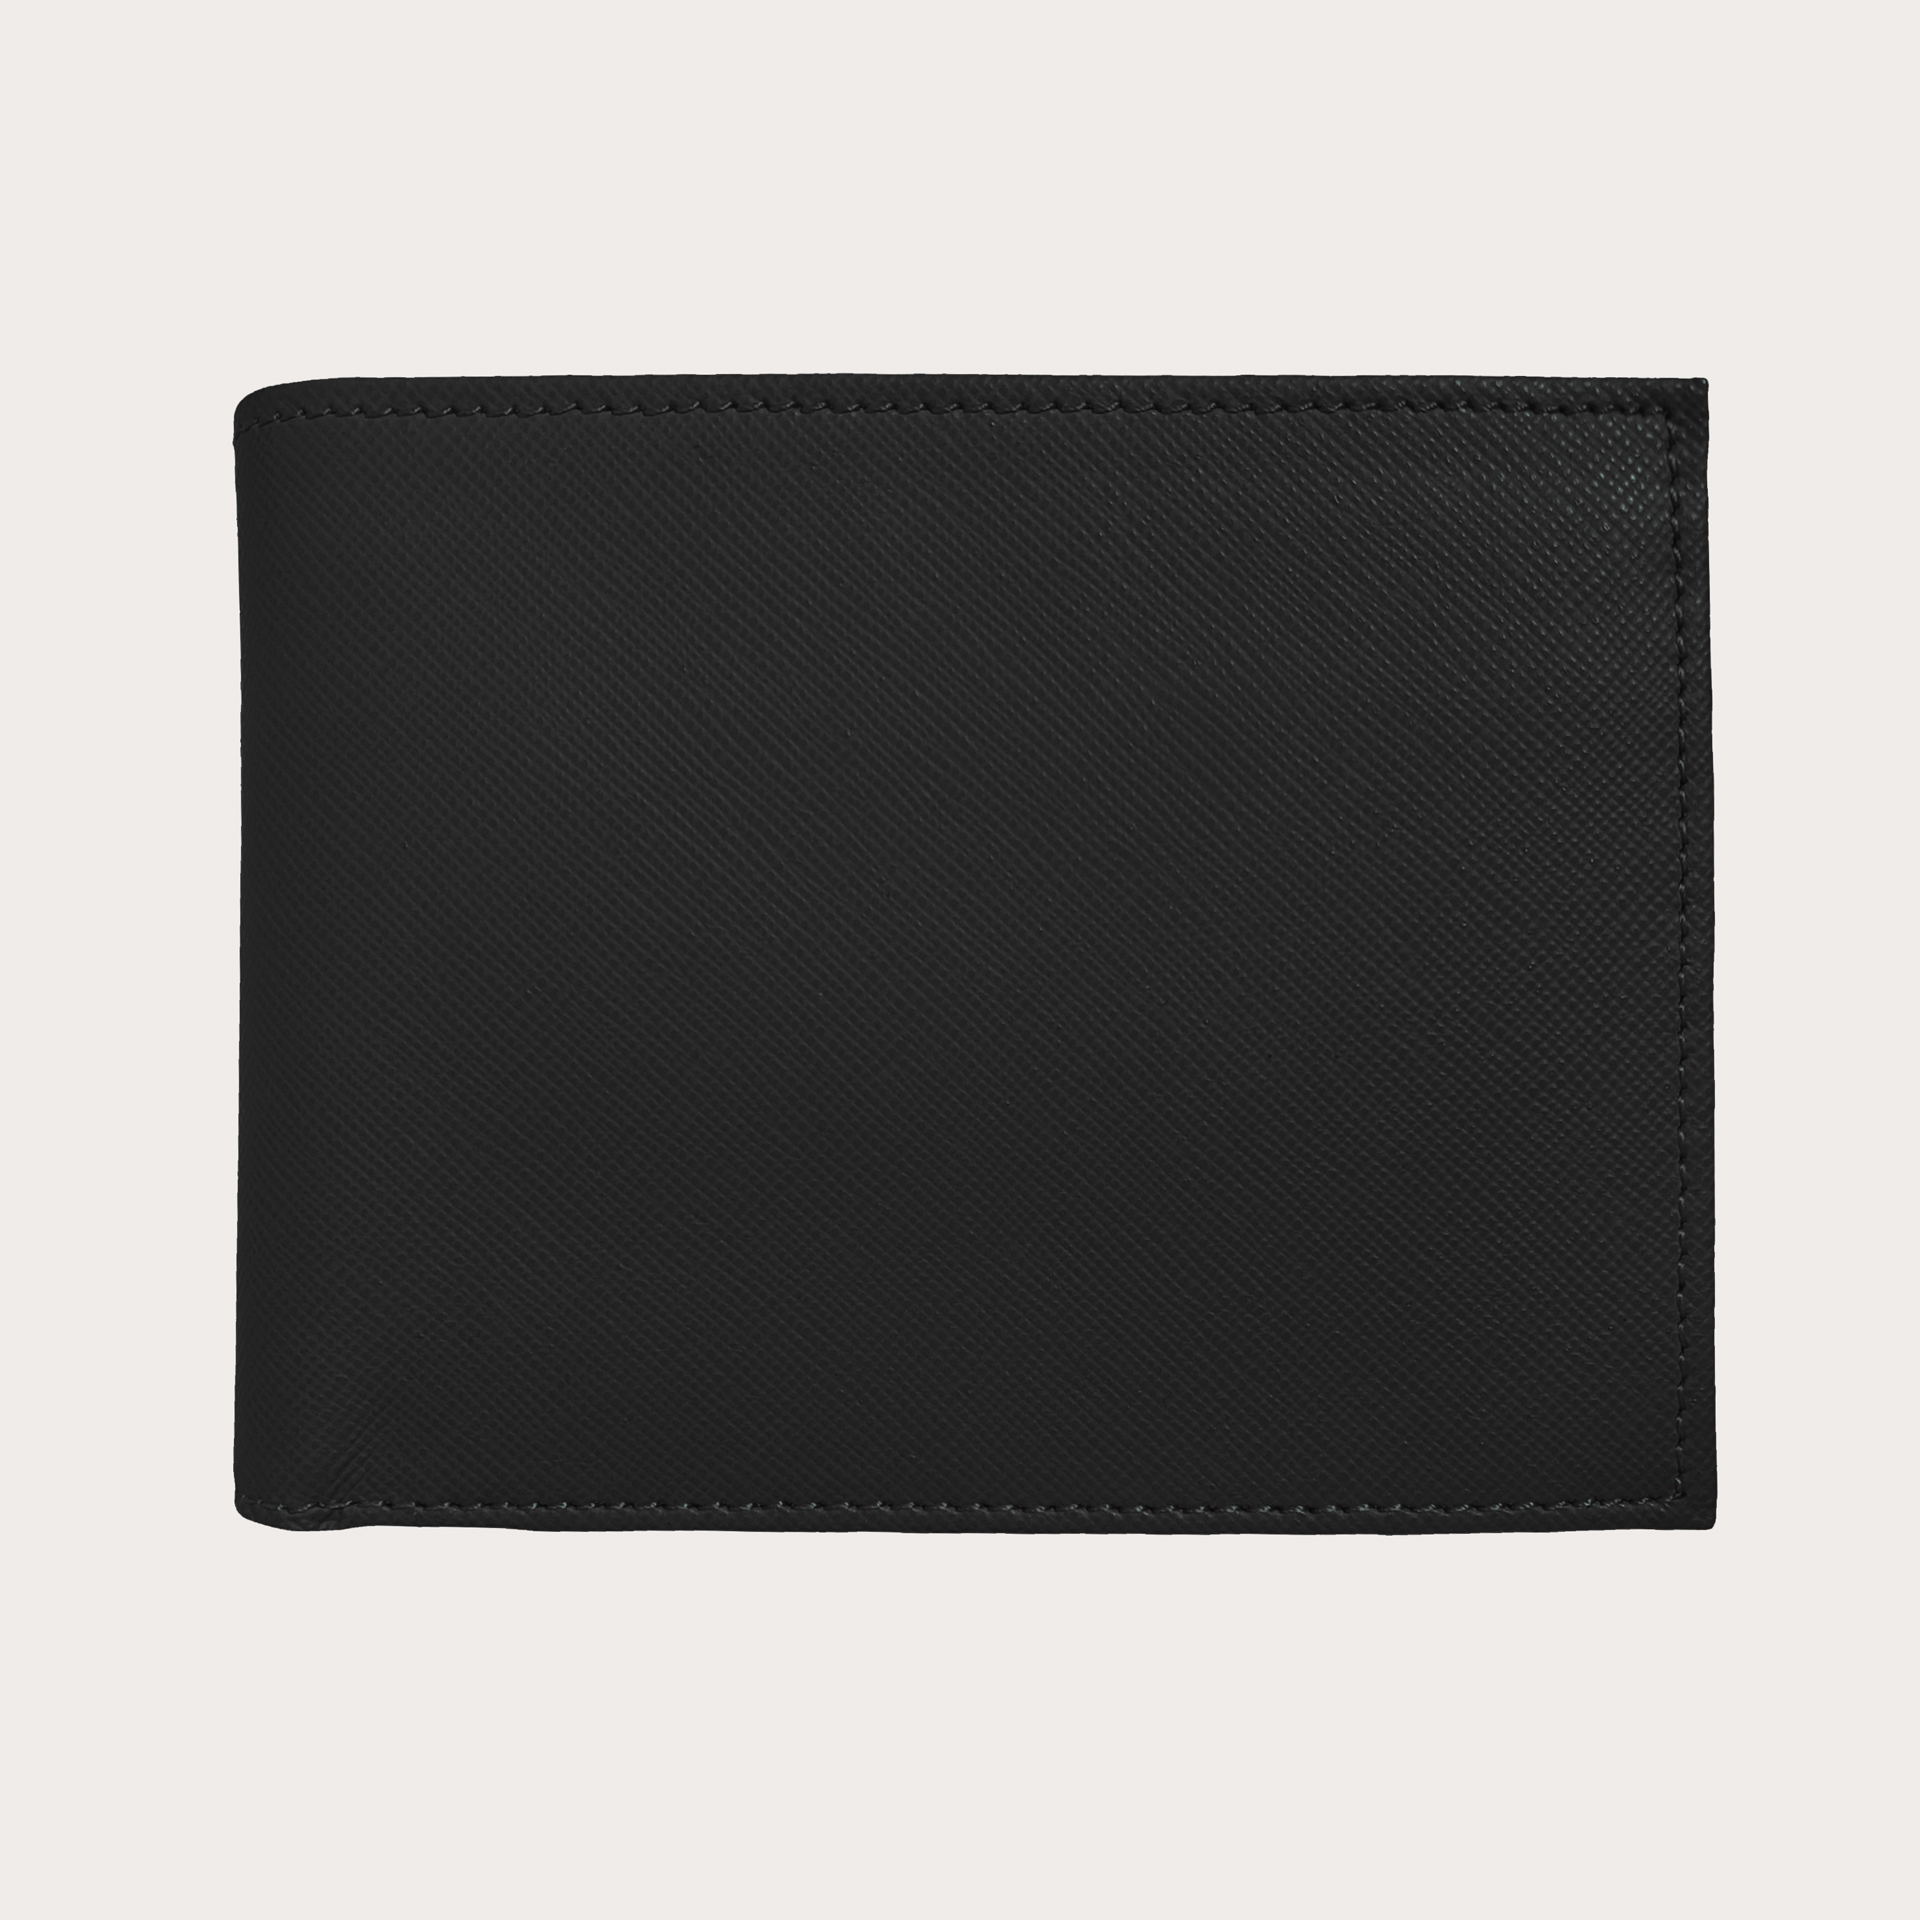 Brucle Men's bifold leather wallet with coin purse, saffiano black